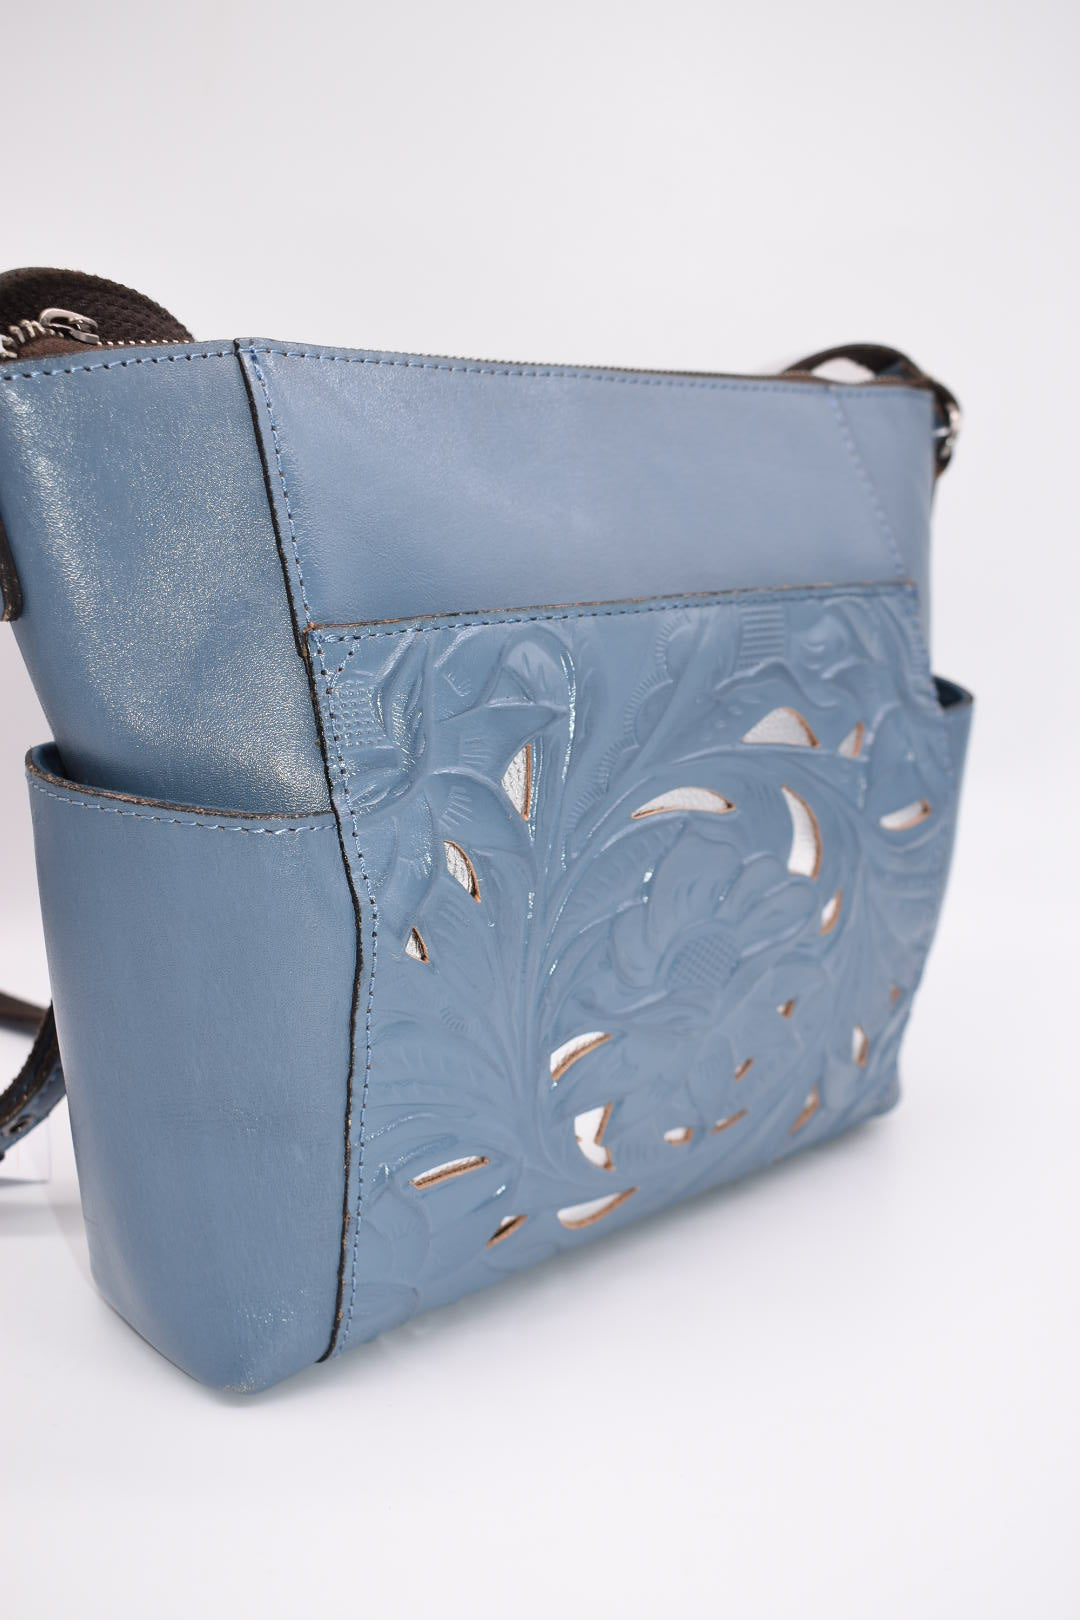 Patricia Nash Aveley Crossbody Bag in Burnished Cutout Tooled Safflower Blue